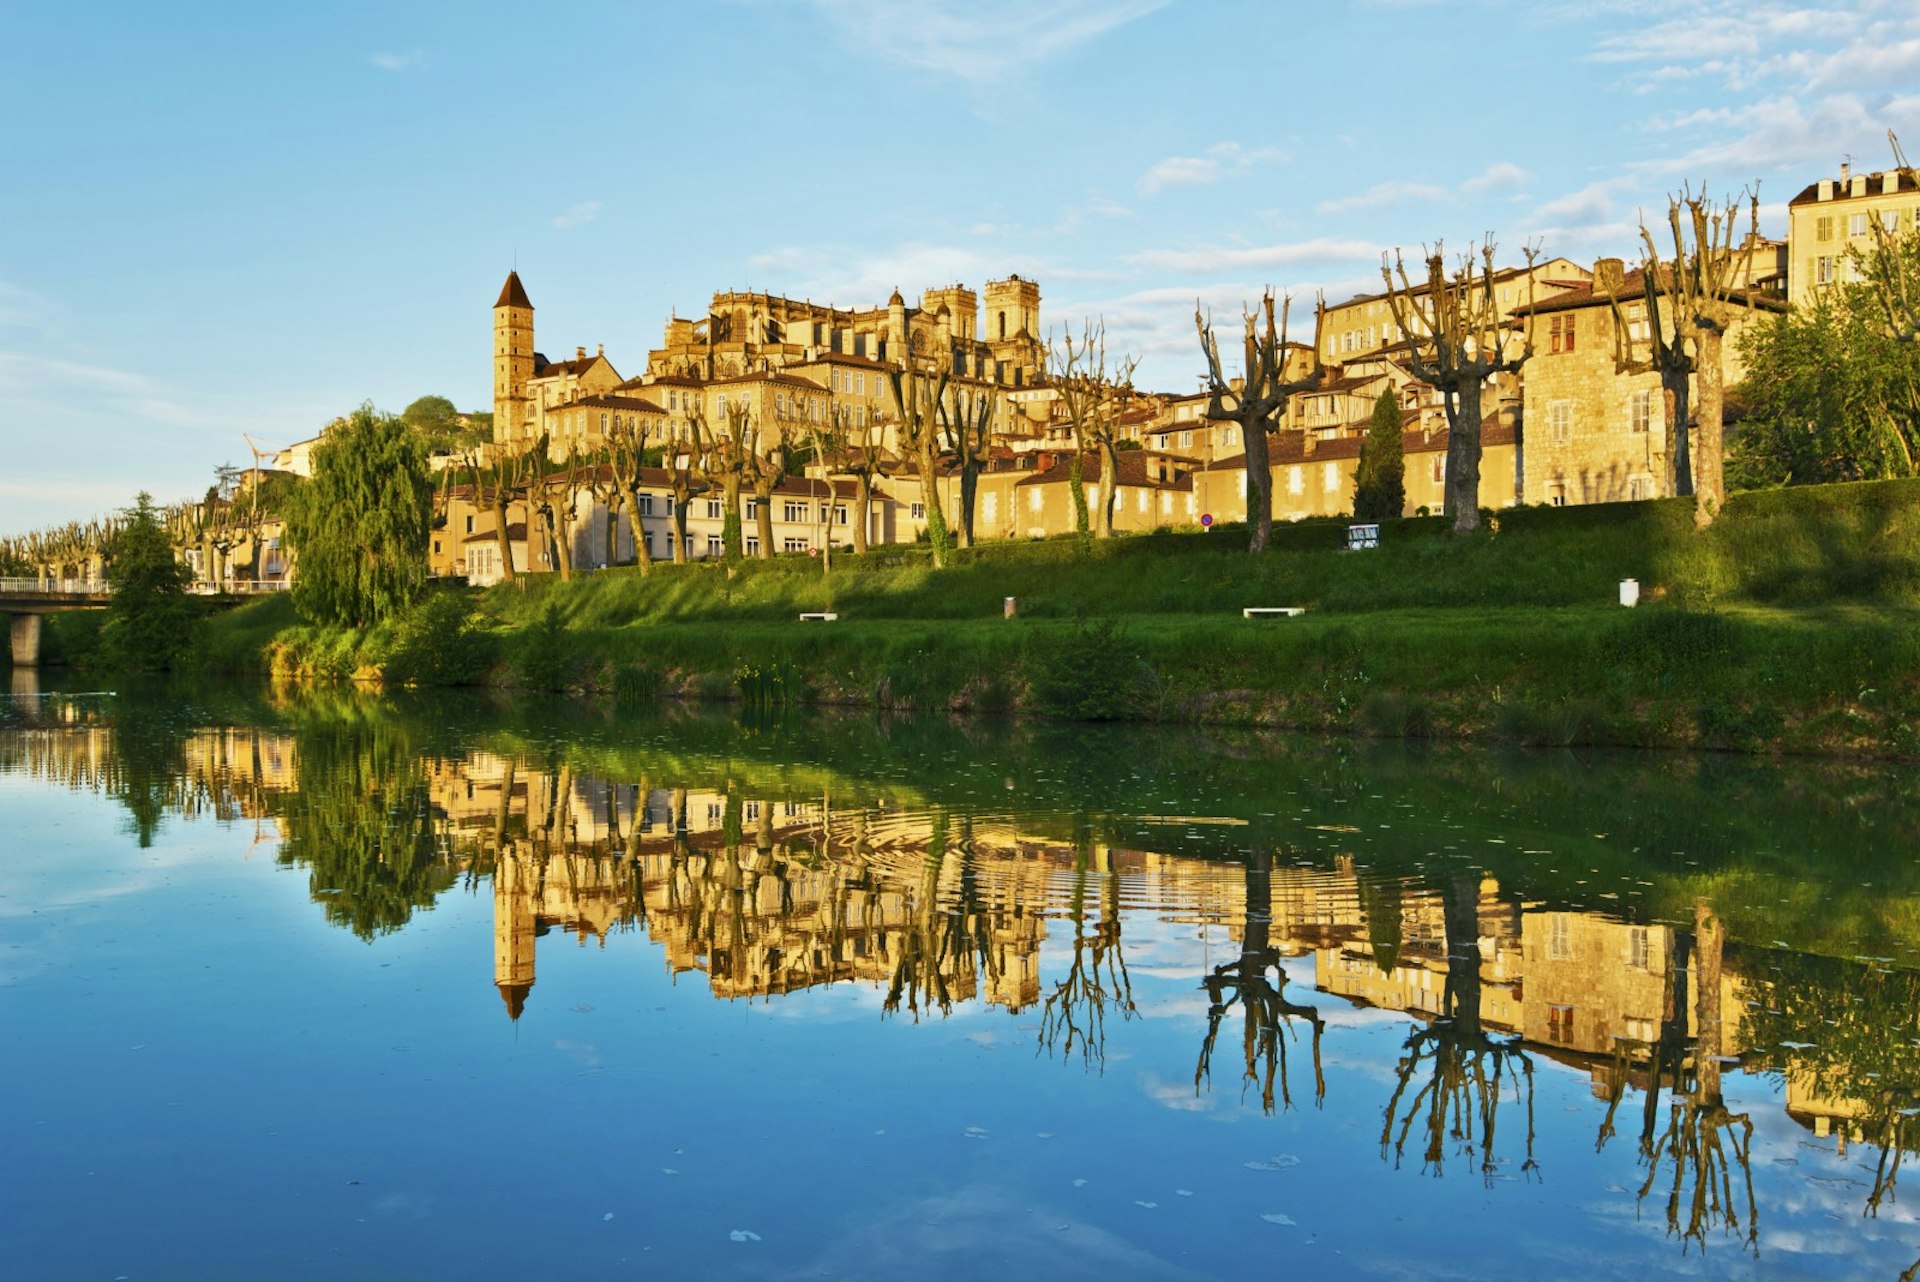 The historic city of Auch, France, shimmers in the Gers river. Image © sasha64f / Shutterstock